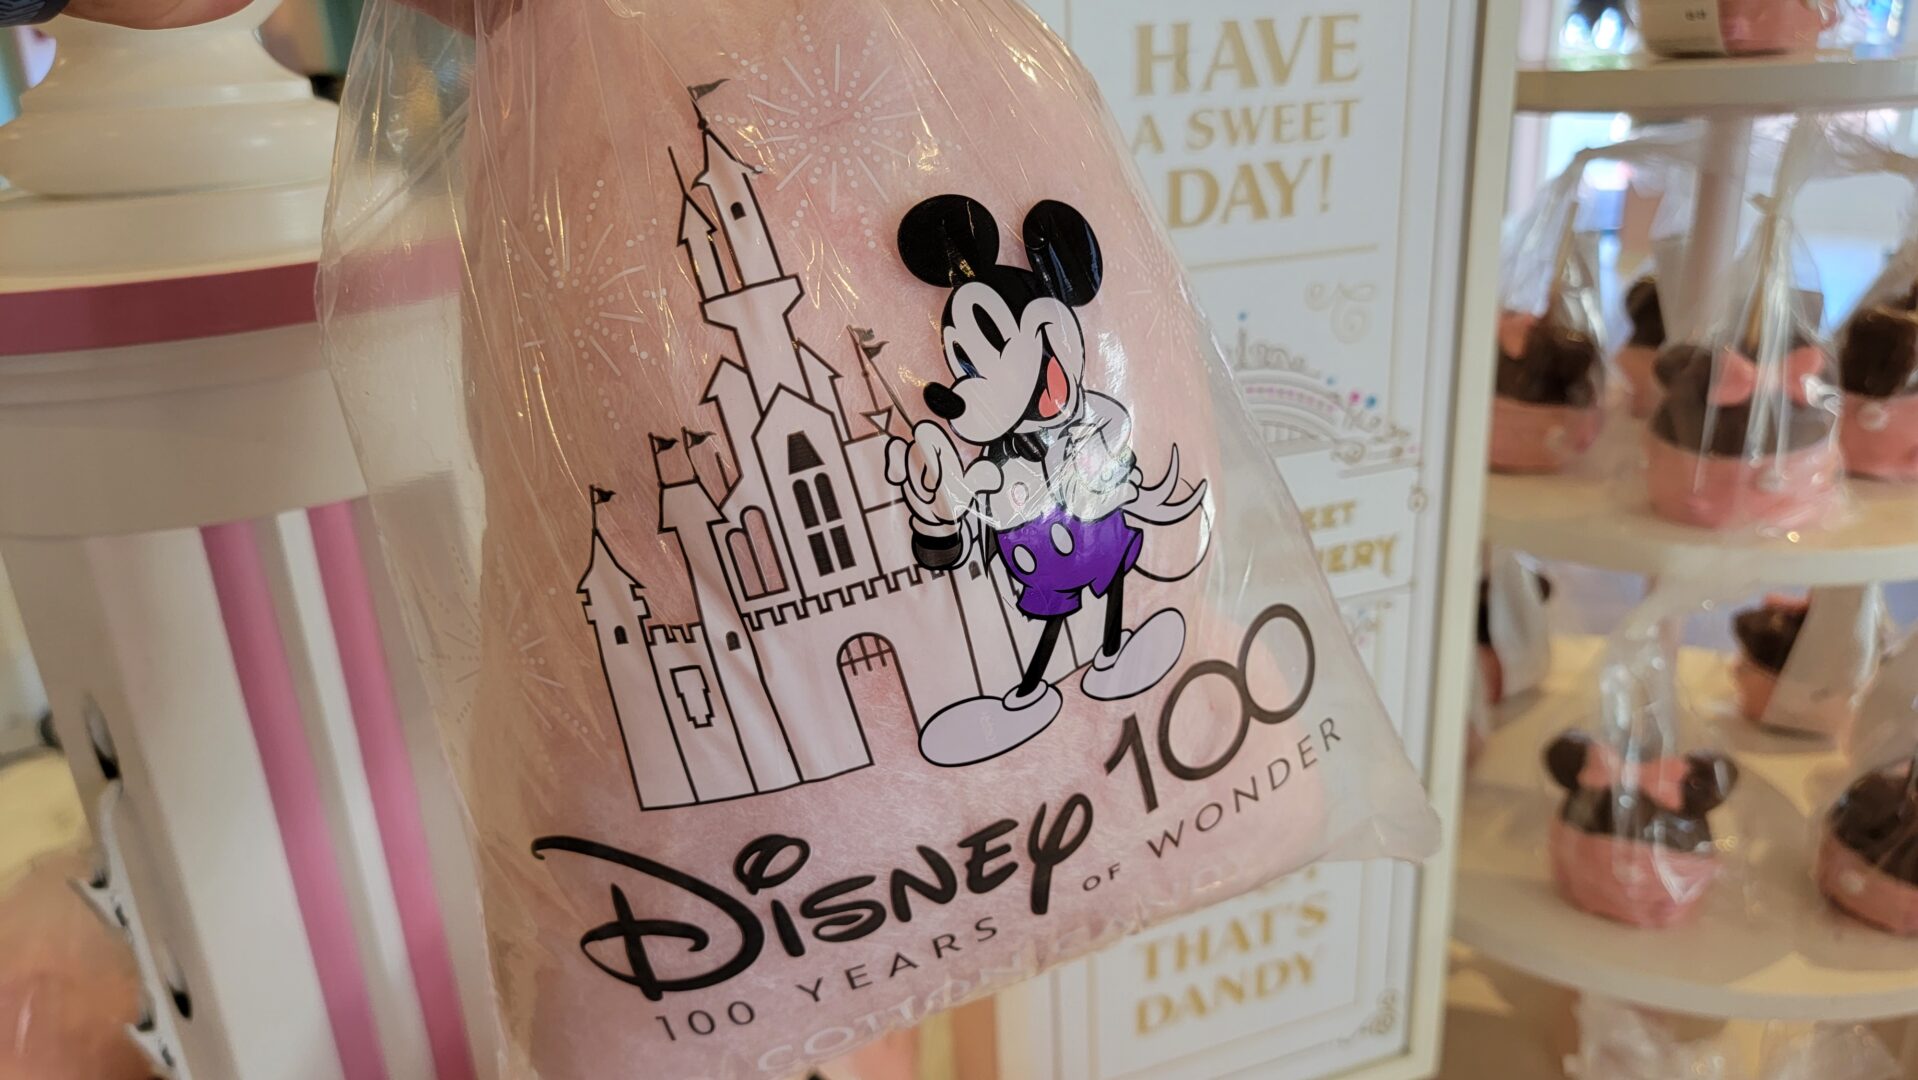 New Disney100 Cotton Candy Spotted at Walt Disney World